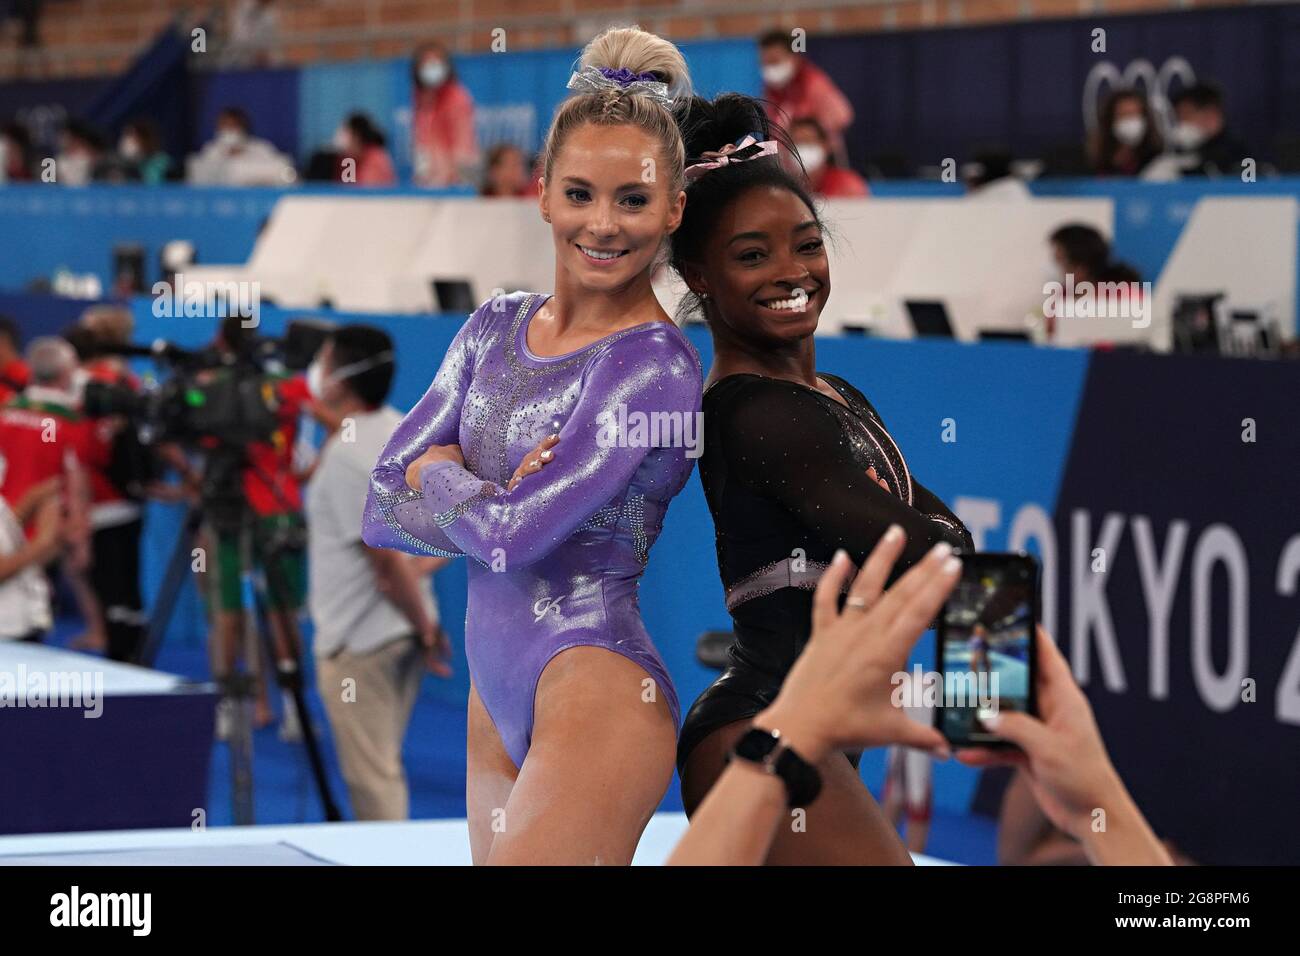 Tokyo, Japan. 22nd July, 2021. United States Women's Gymnastic teammates Simone Biles, right, and Mykayla Skinner, pose together after their practice session at Ariake Gymnastics Centre before the start of the Tokyo Olympic Games in Tokyo, Japan, on Thursday July 22, 2021. Photo by Richard Ellis/UPI. Credit: UPI/Alamy Live News Stock Photo